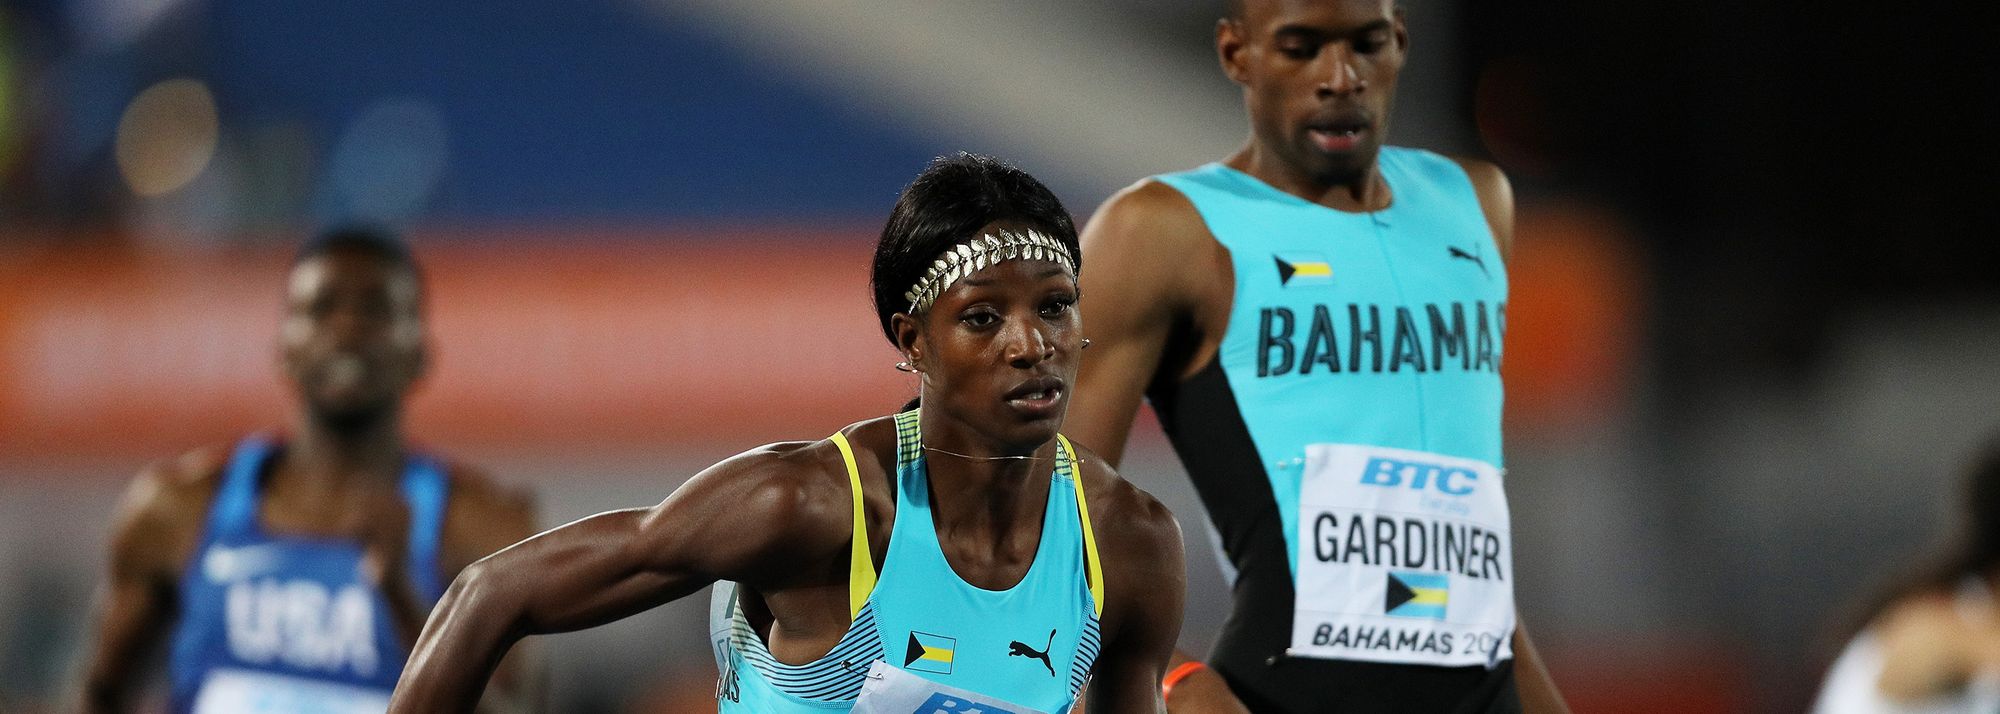 The composition of the teams may be slightly different, but a USA-Netherlands showdown in the mixed 4x400m could provide one of the highlights of the World Athletics Relays Bahamas 24